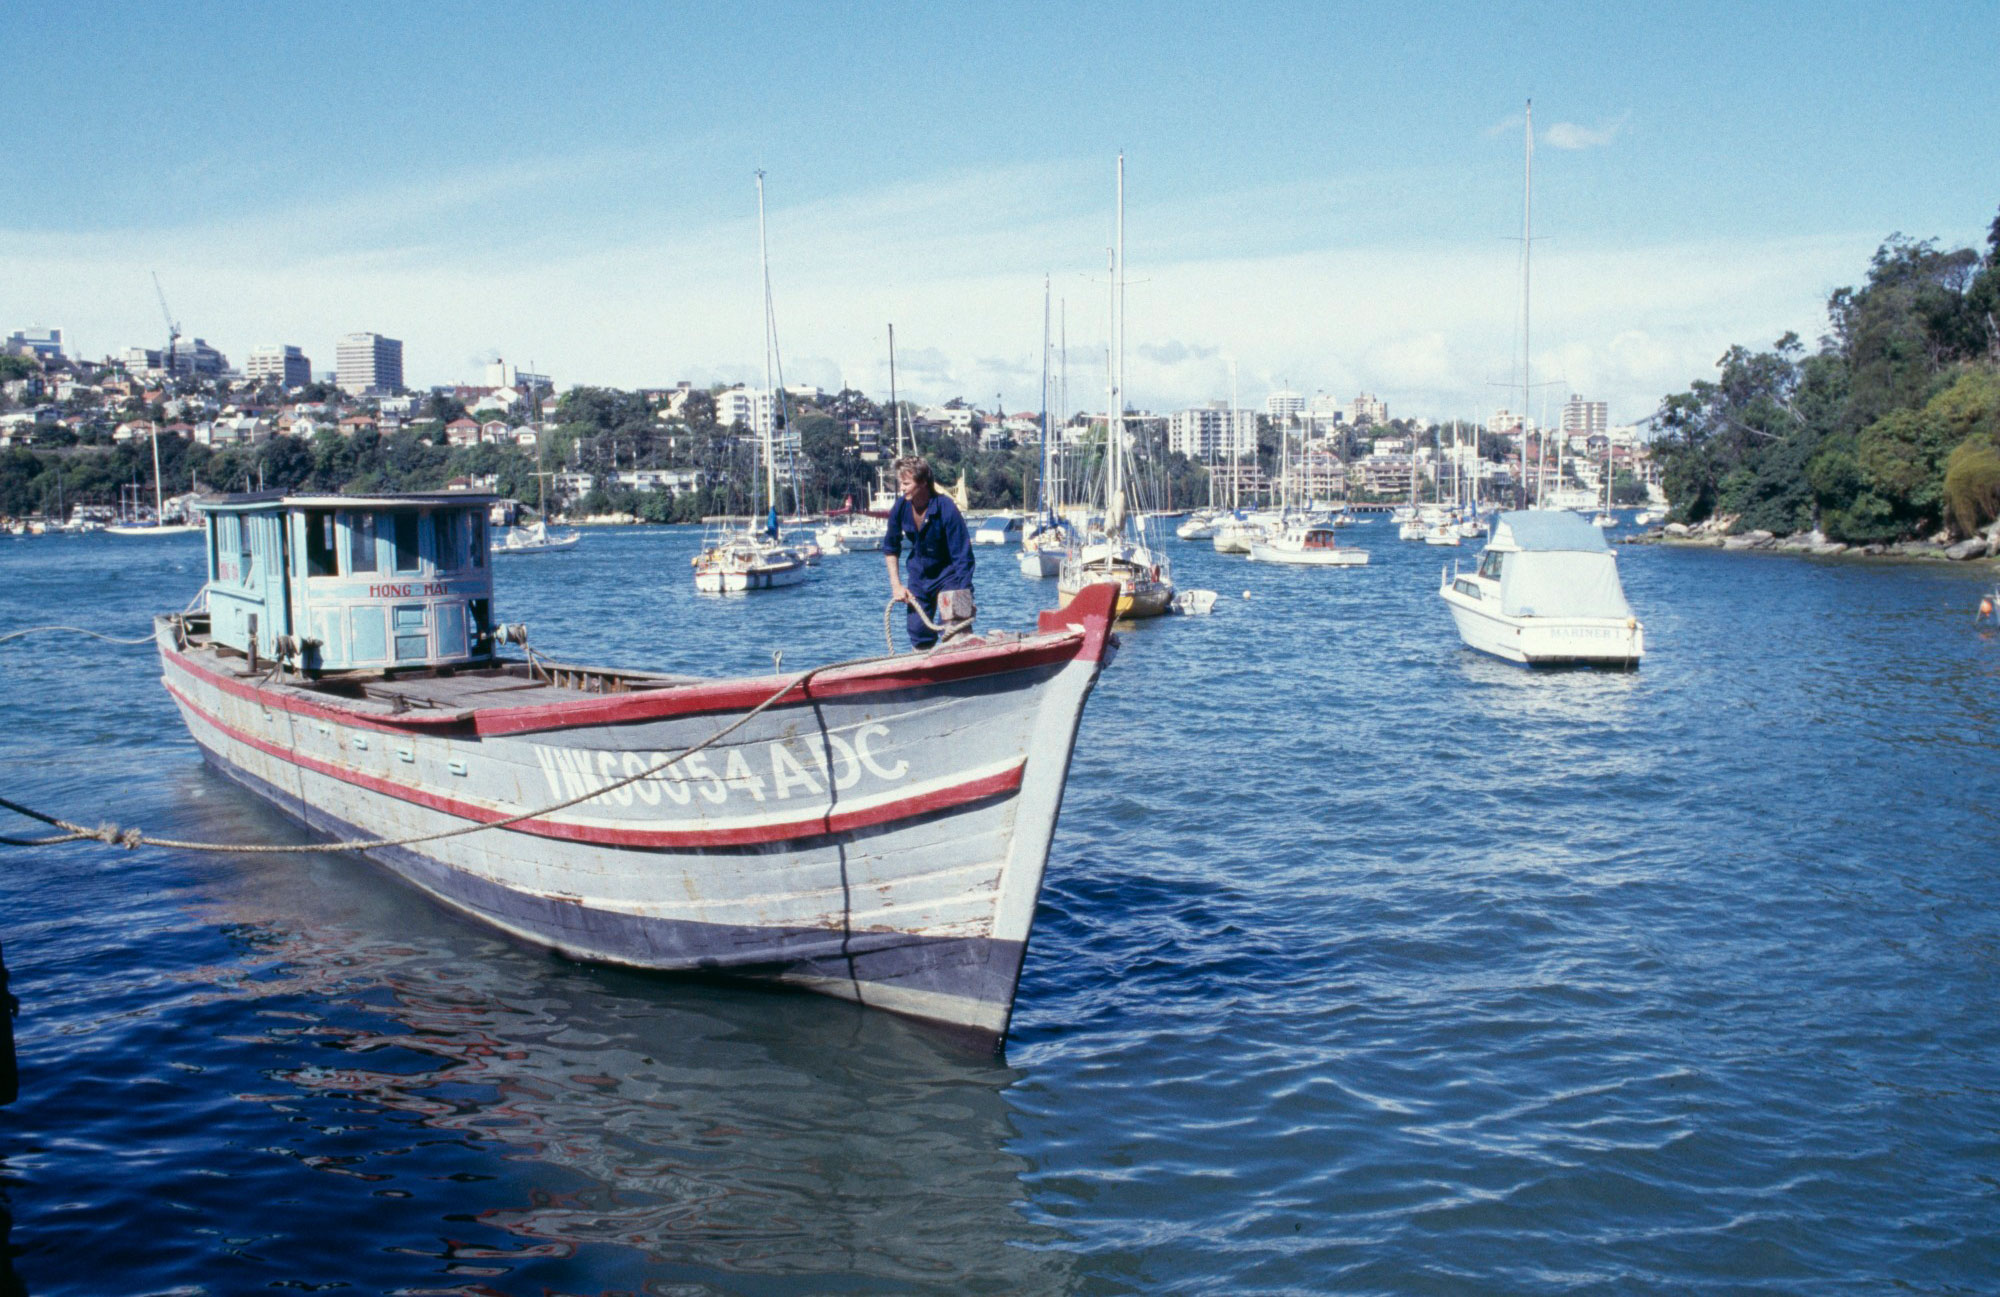 Motor fishing boat Hong Hai, which transported 38 Vietnamese refugees to Australia in 1978. Photo: Jenni Carter.